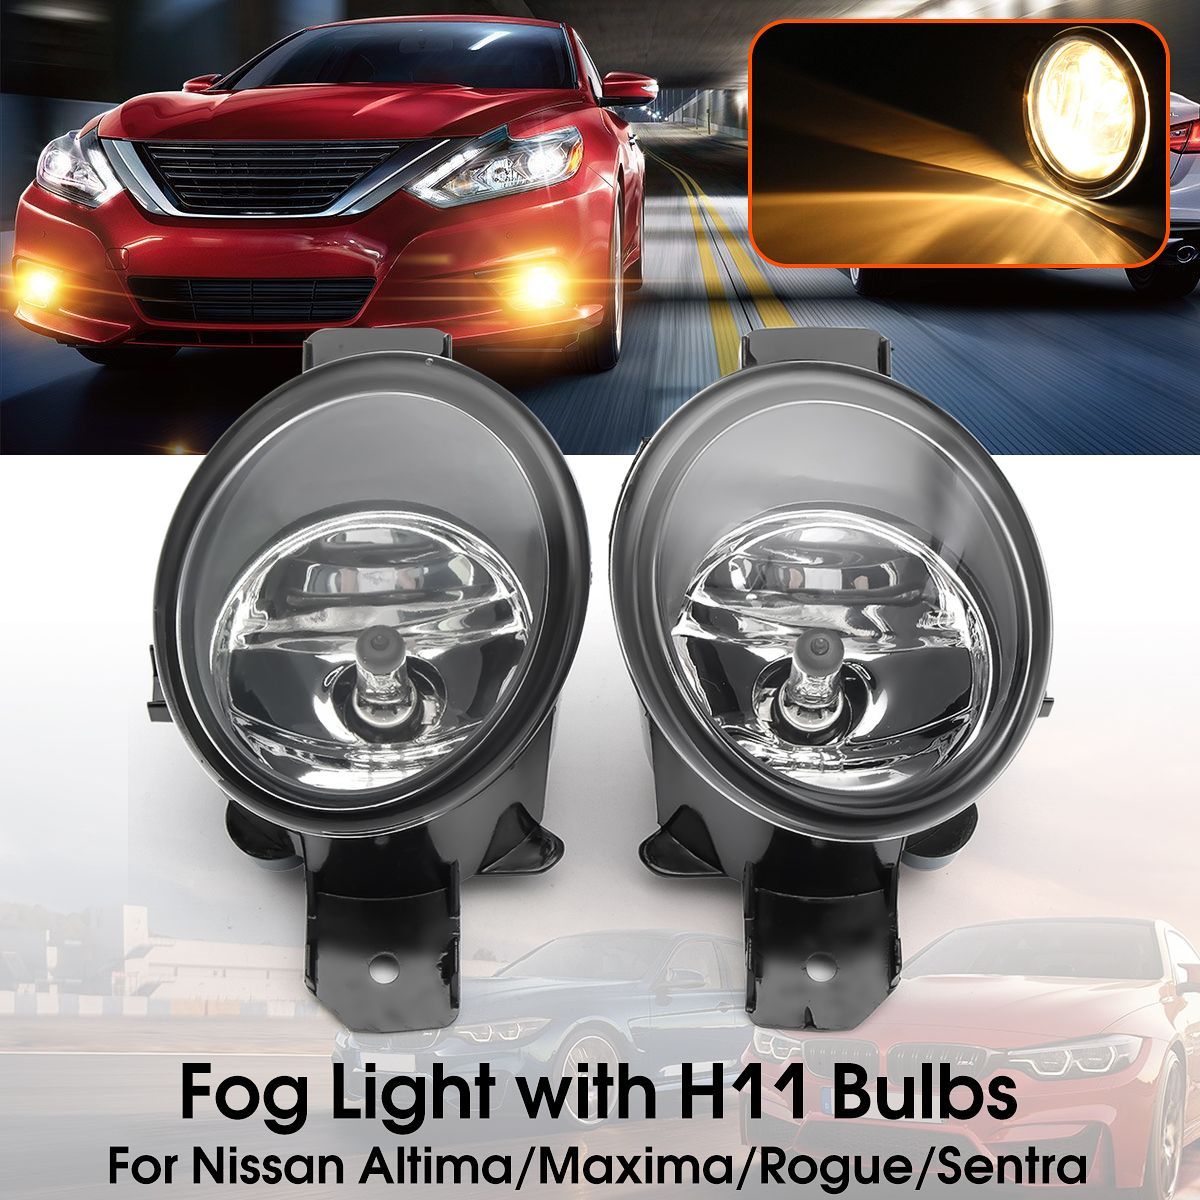 Car-Front-Bumper-Fog-Lights-Amber-with-H11-Bulbs-Pair-for-Nissan-Altima-Maxima-Rogue-Sentra-1406916